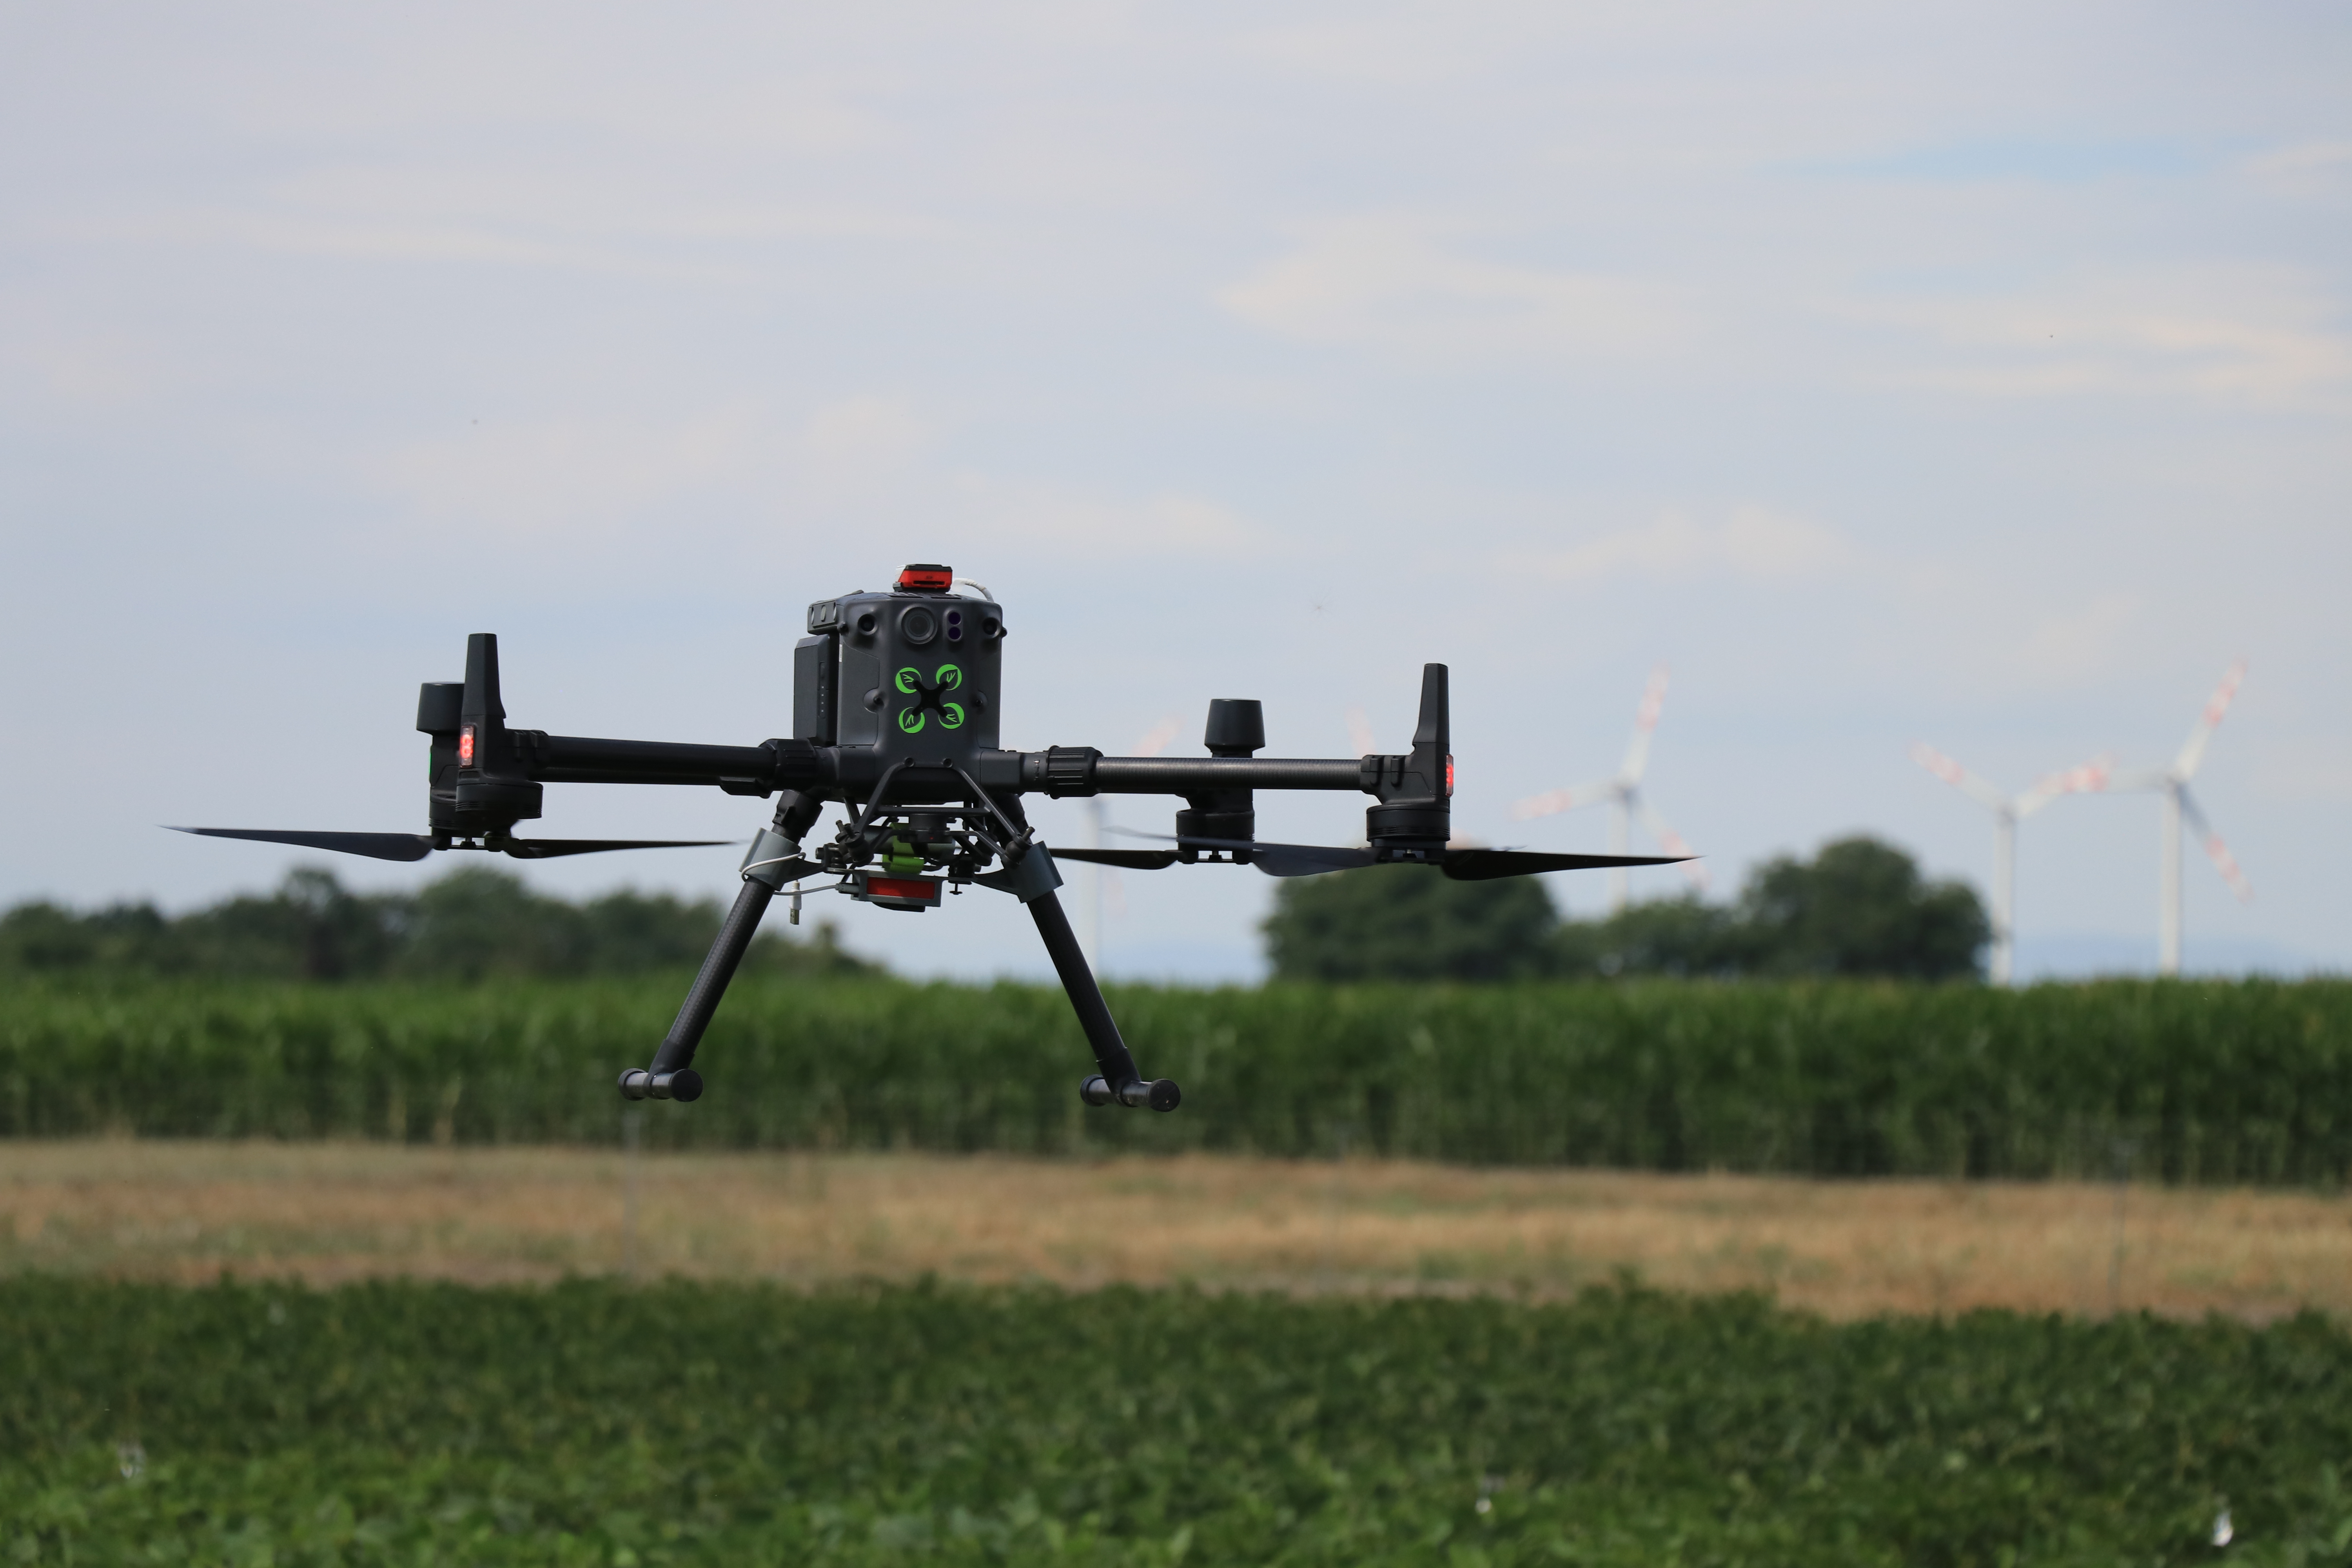 In four trials, drone flights were conducted on June 16 and July 7, respectively.